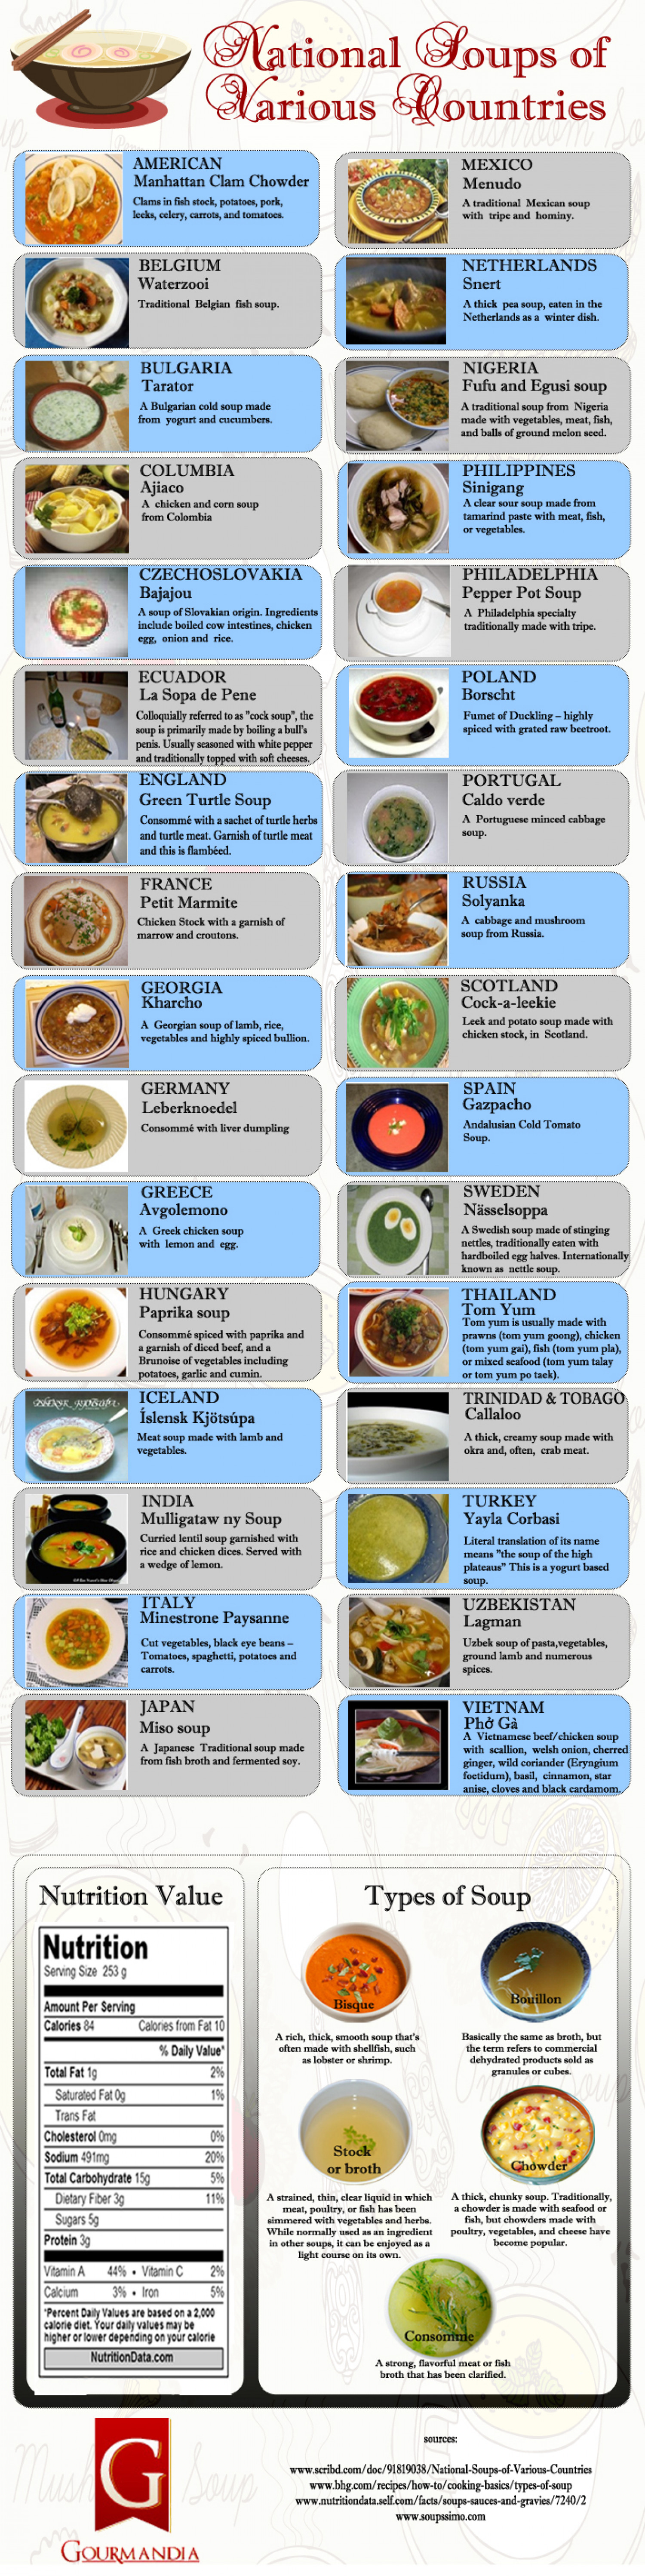 National Soups of Various Countries